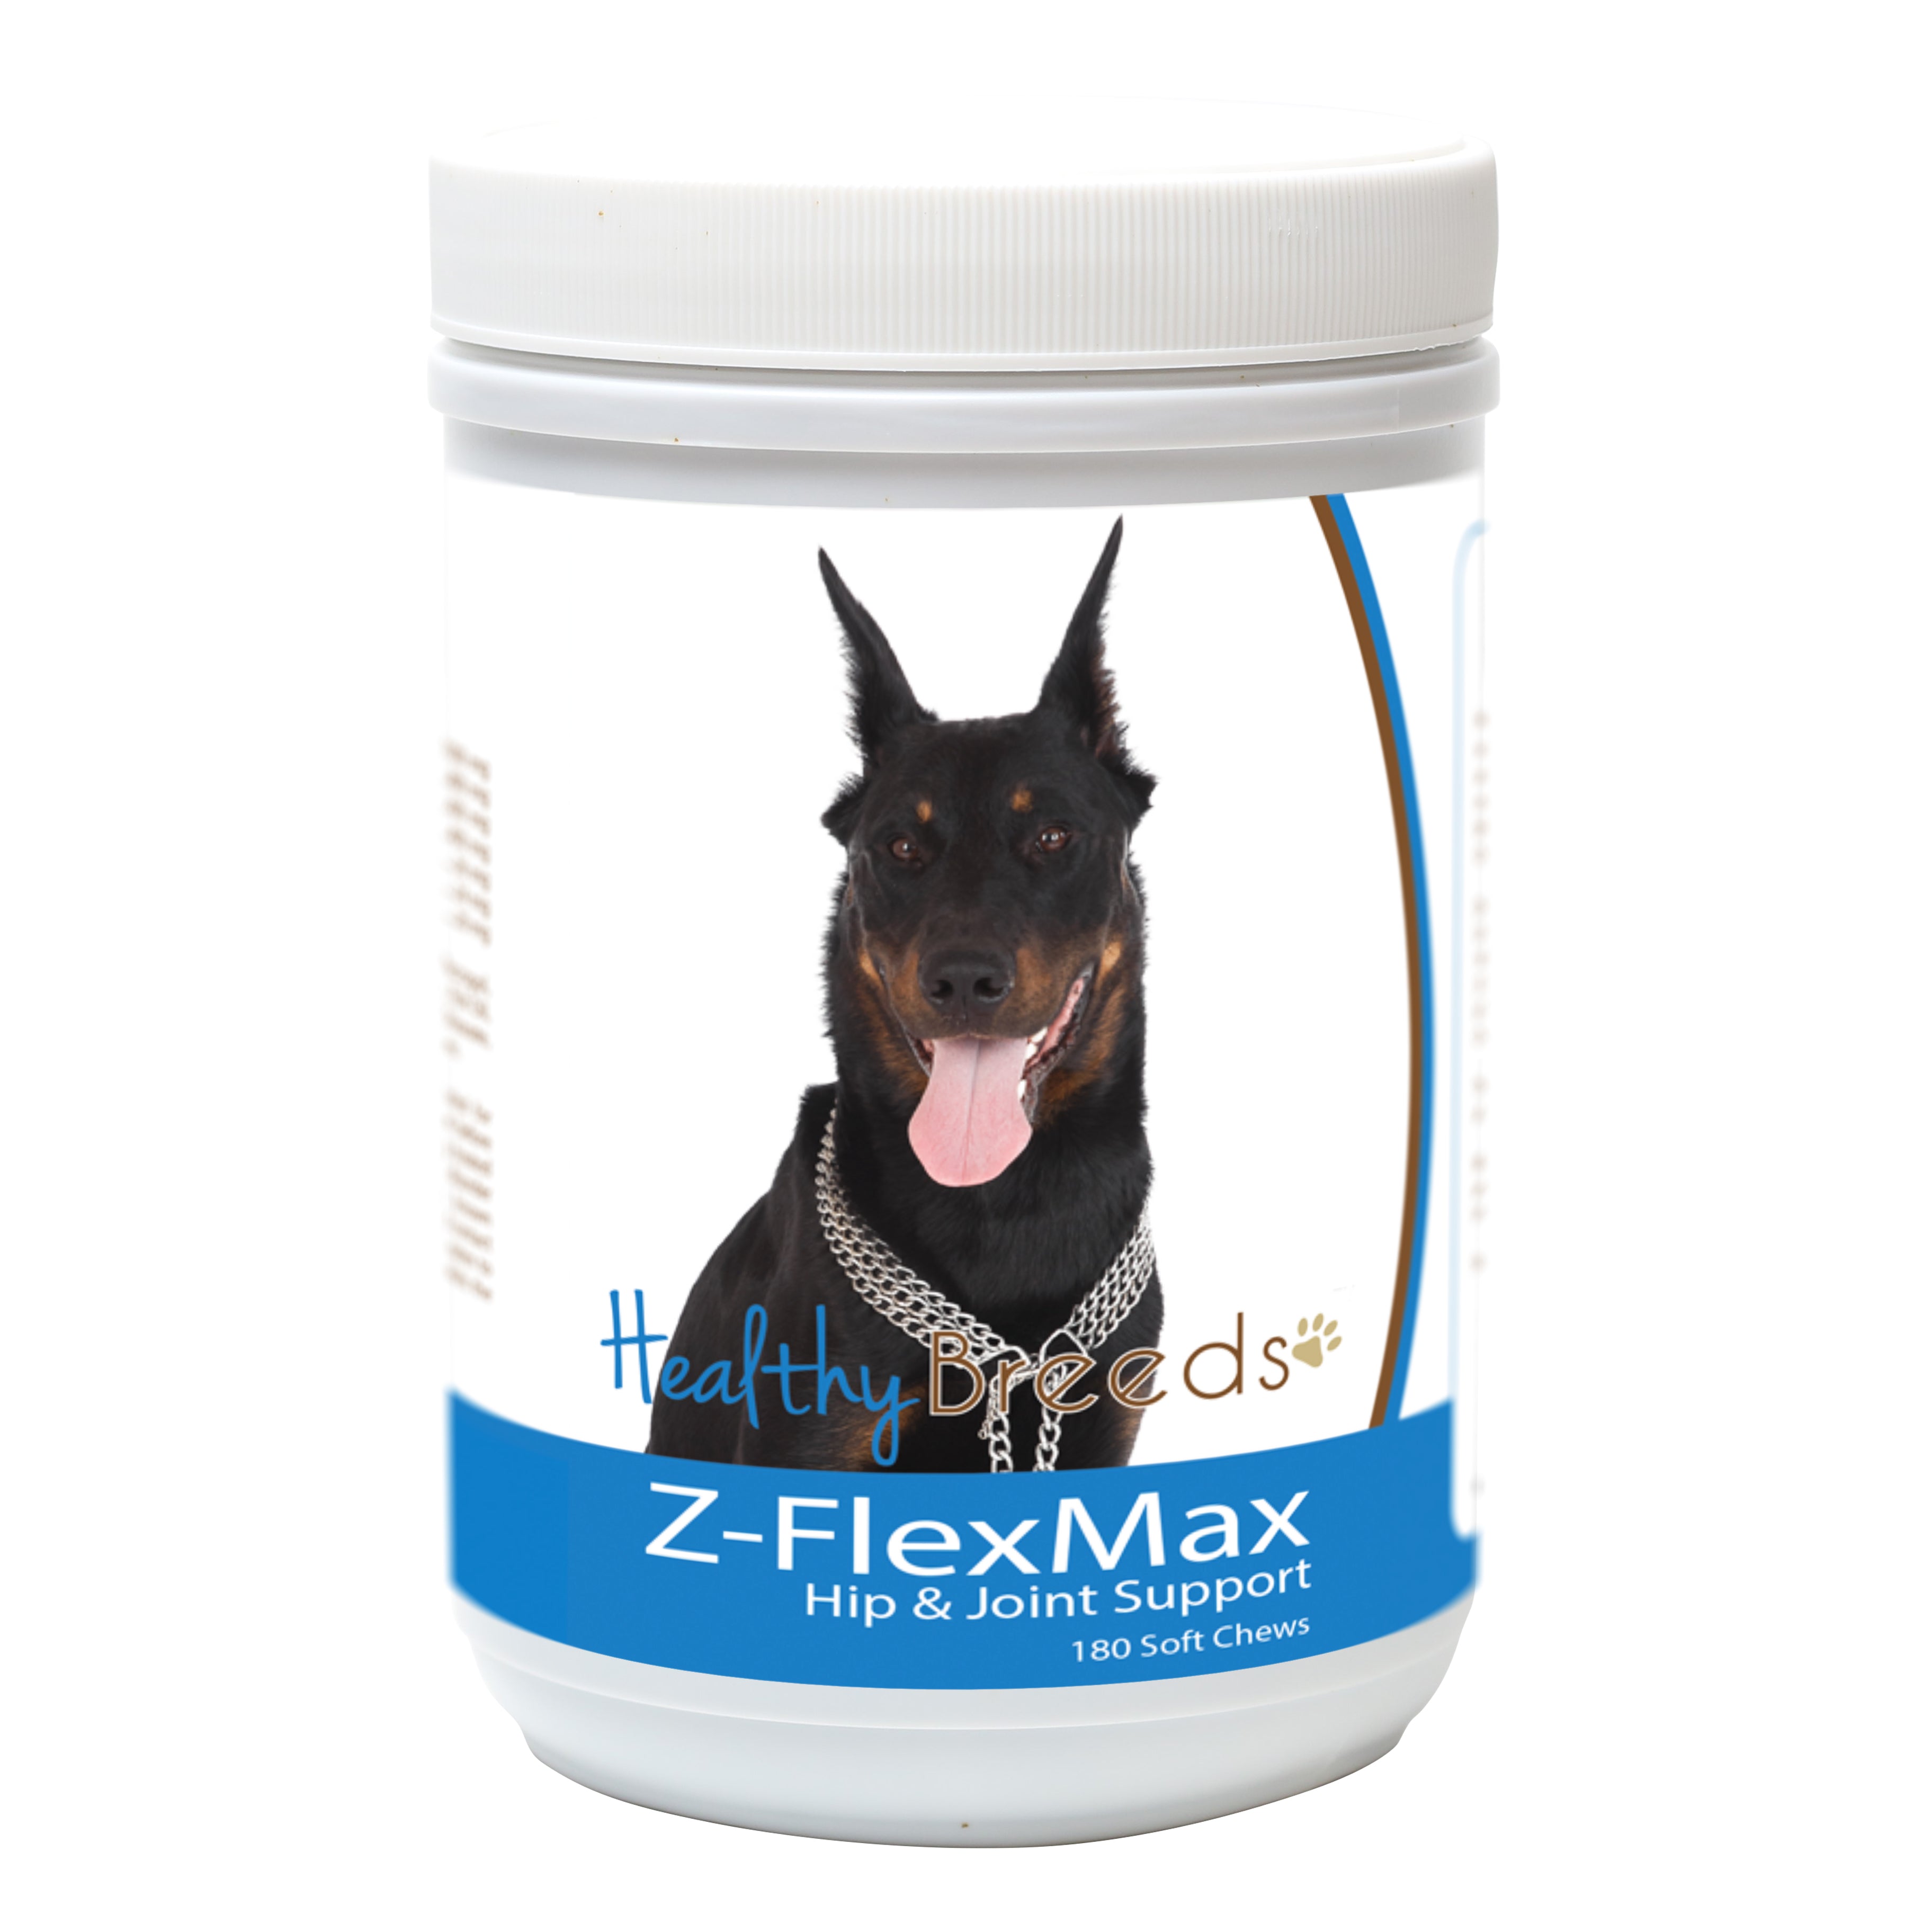 Beauceron Z-Flex Max Dog Hip and Joint Support 180 Count